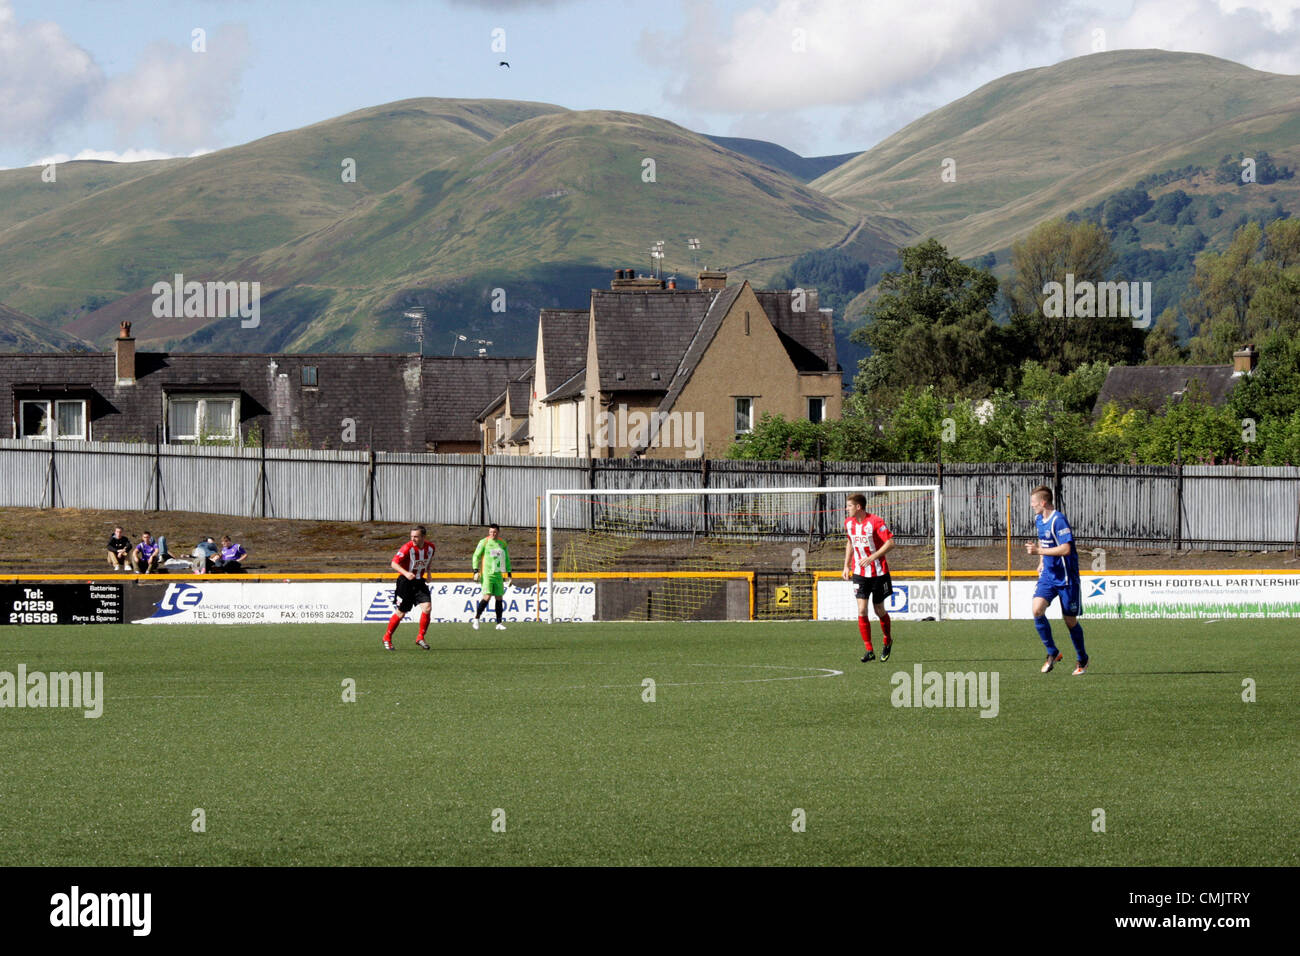 18.08.2012 Alloa, Scotland.  the Ochil hills during the Scottish Football League Division 3 game between Clyde and Peterhead from Recreation Ground. Stock Photo